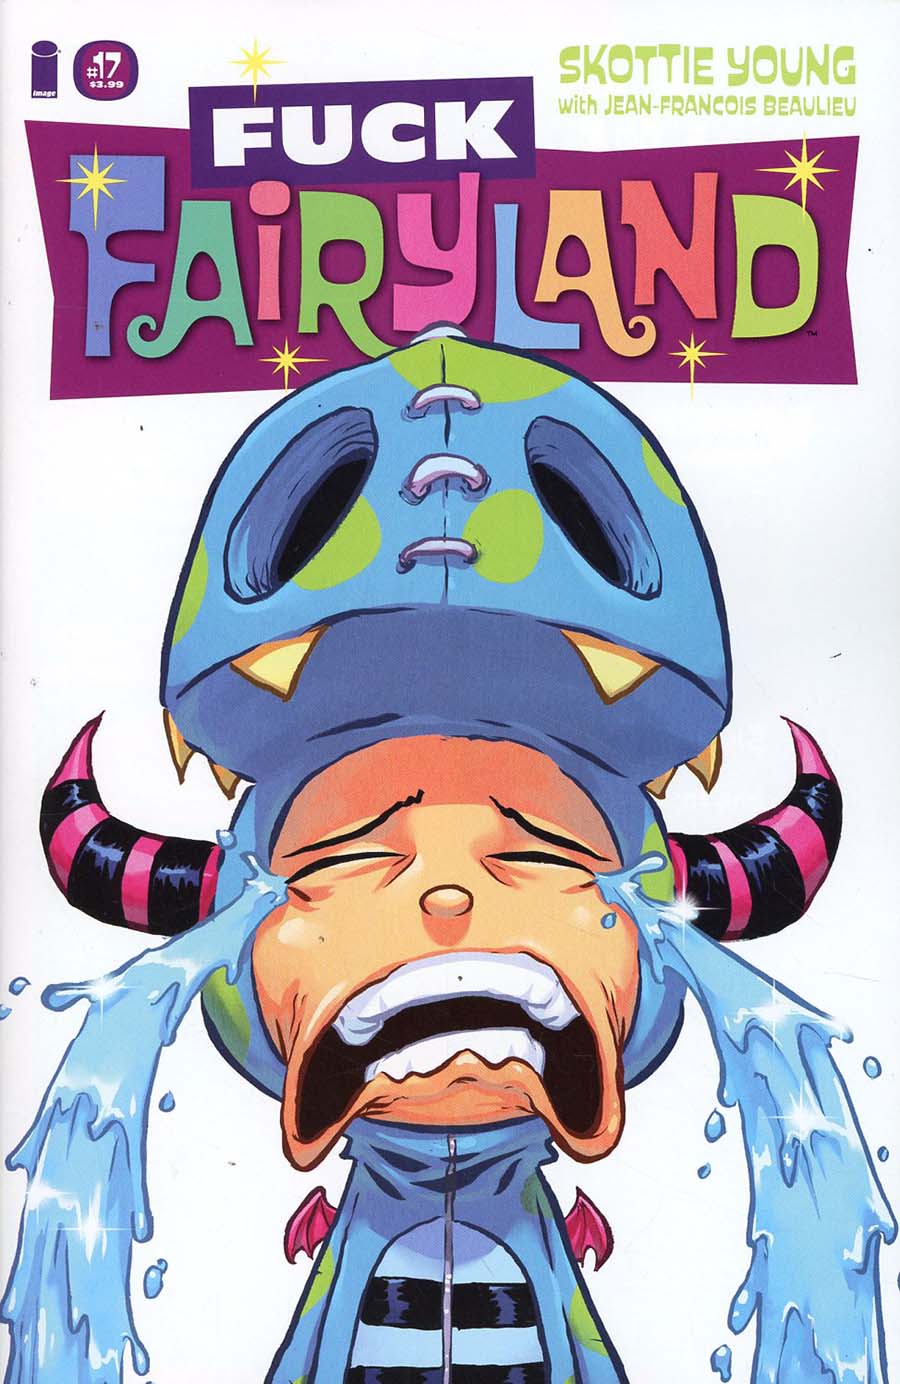 I Hate Fairyland #17 Cover B Variant Skottie Young F*ck Fairyland Cover